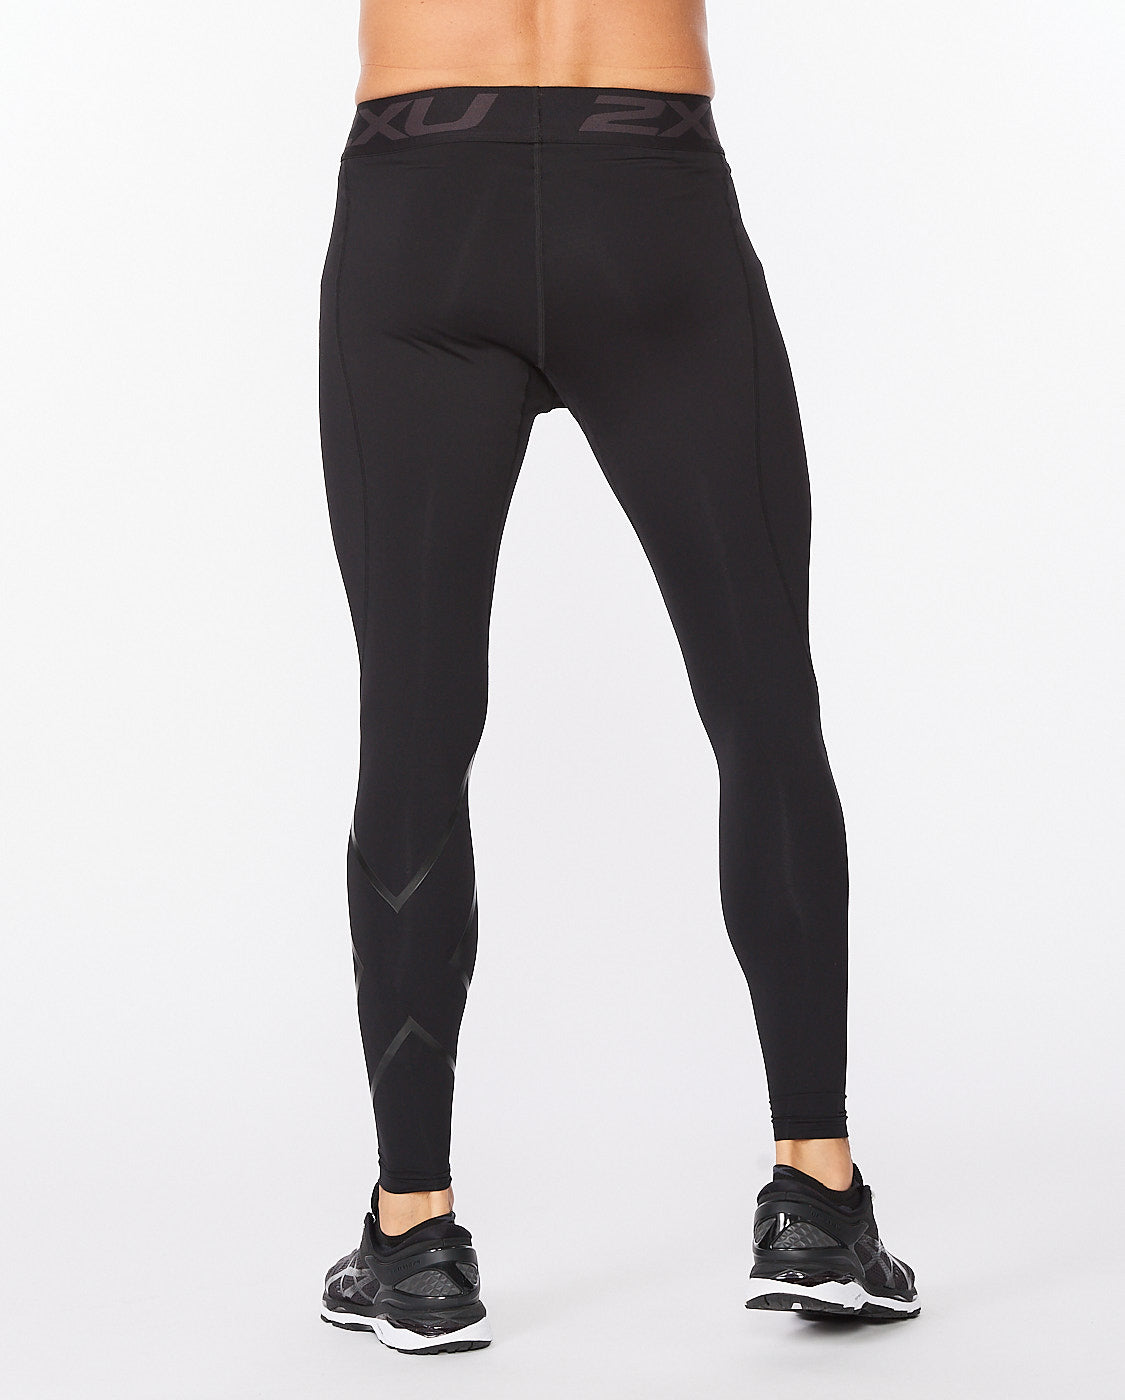 Ignition Compression Tights – 2XU